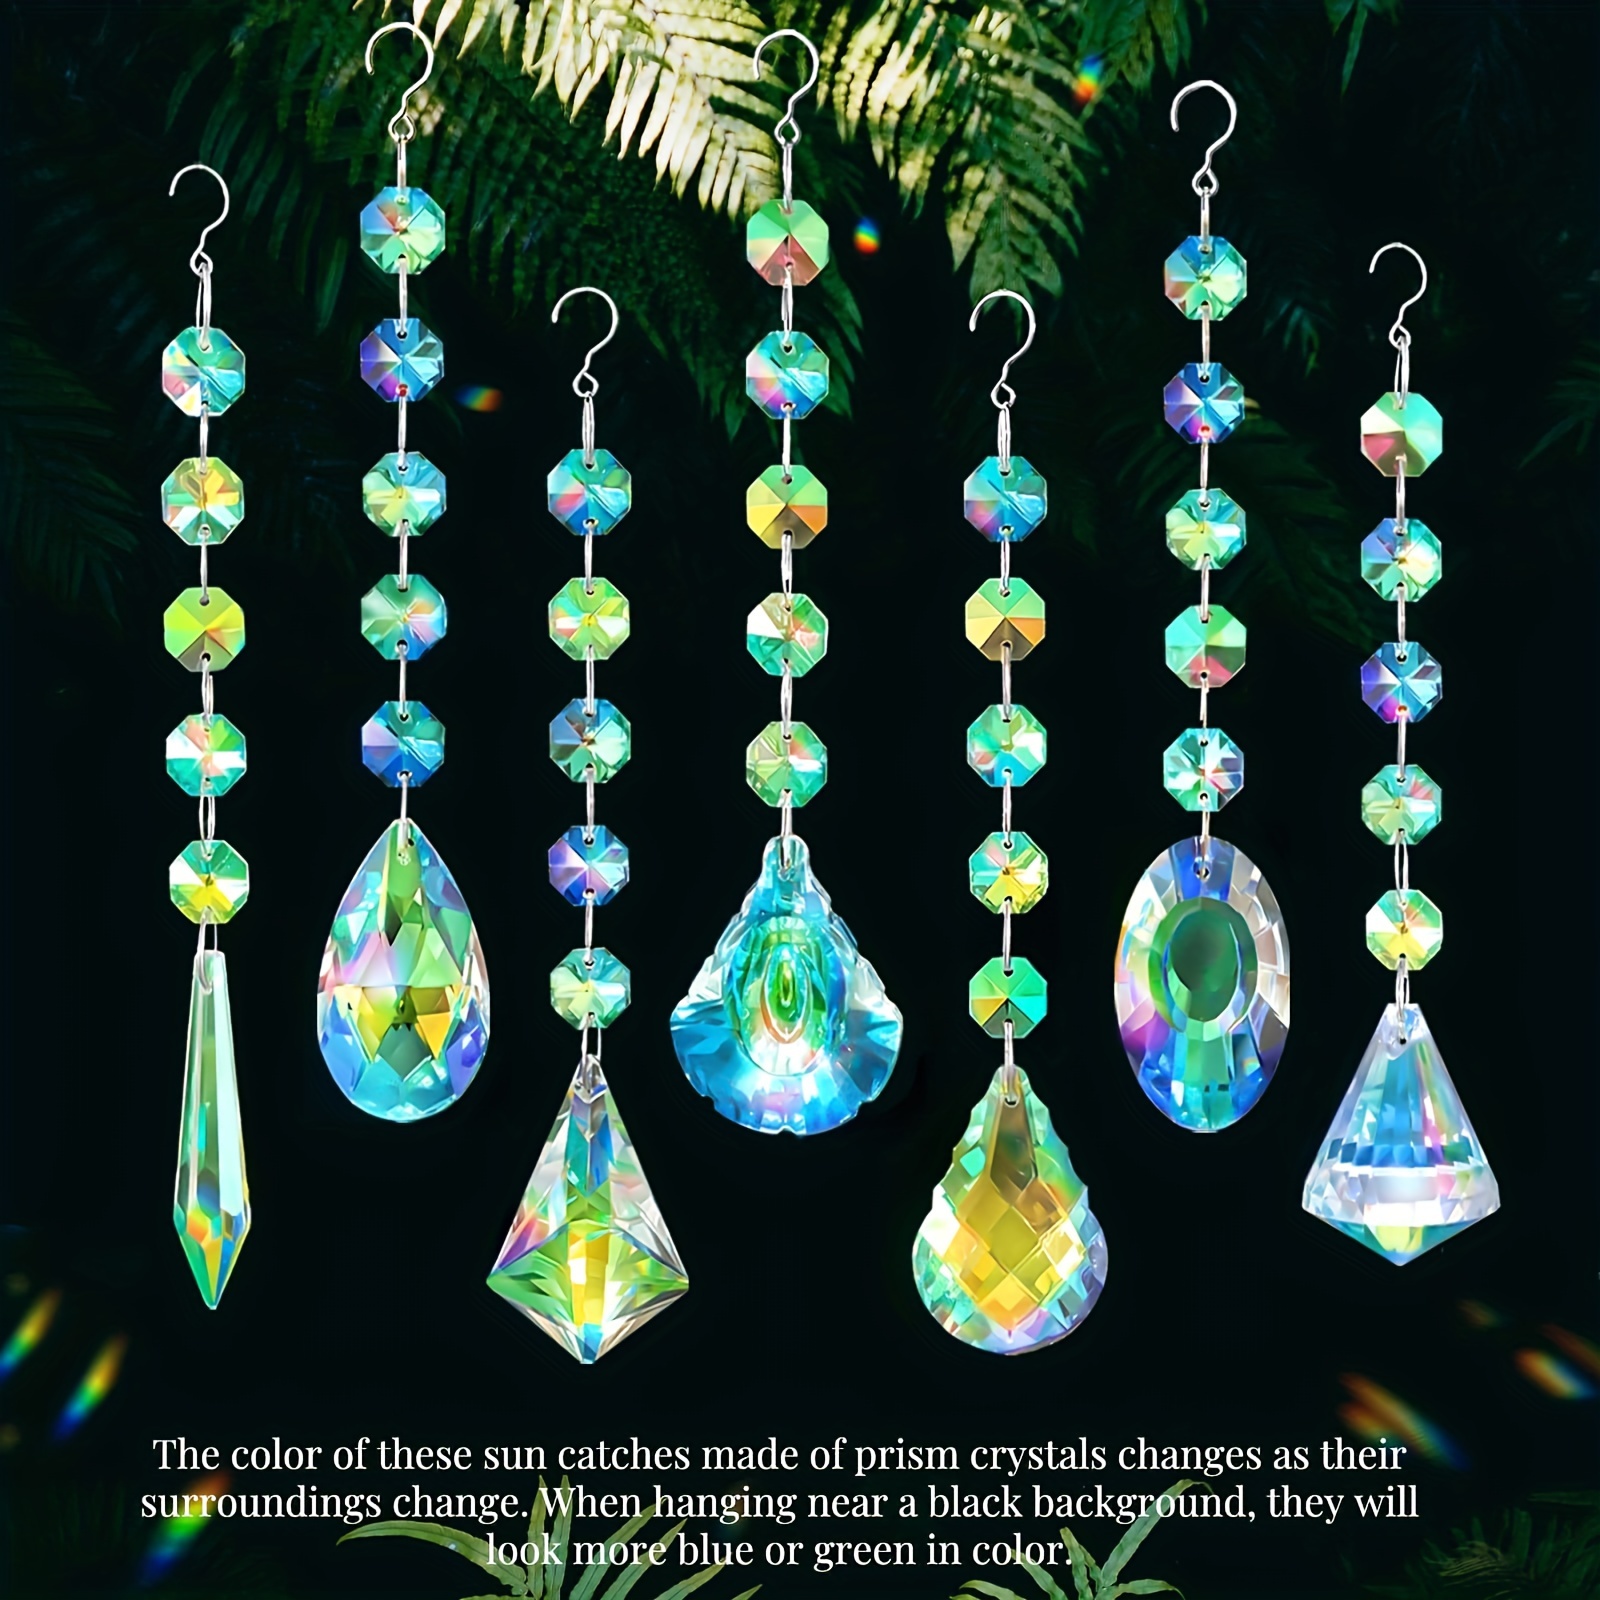 

7 Pcs Glass Sunlight Catcher Bead, Colorful Hanging Glass Suncatchers Prism With Chain Pendant Ornament For Home Garden Window Party Wedding Decorations